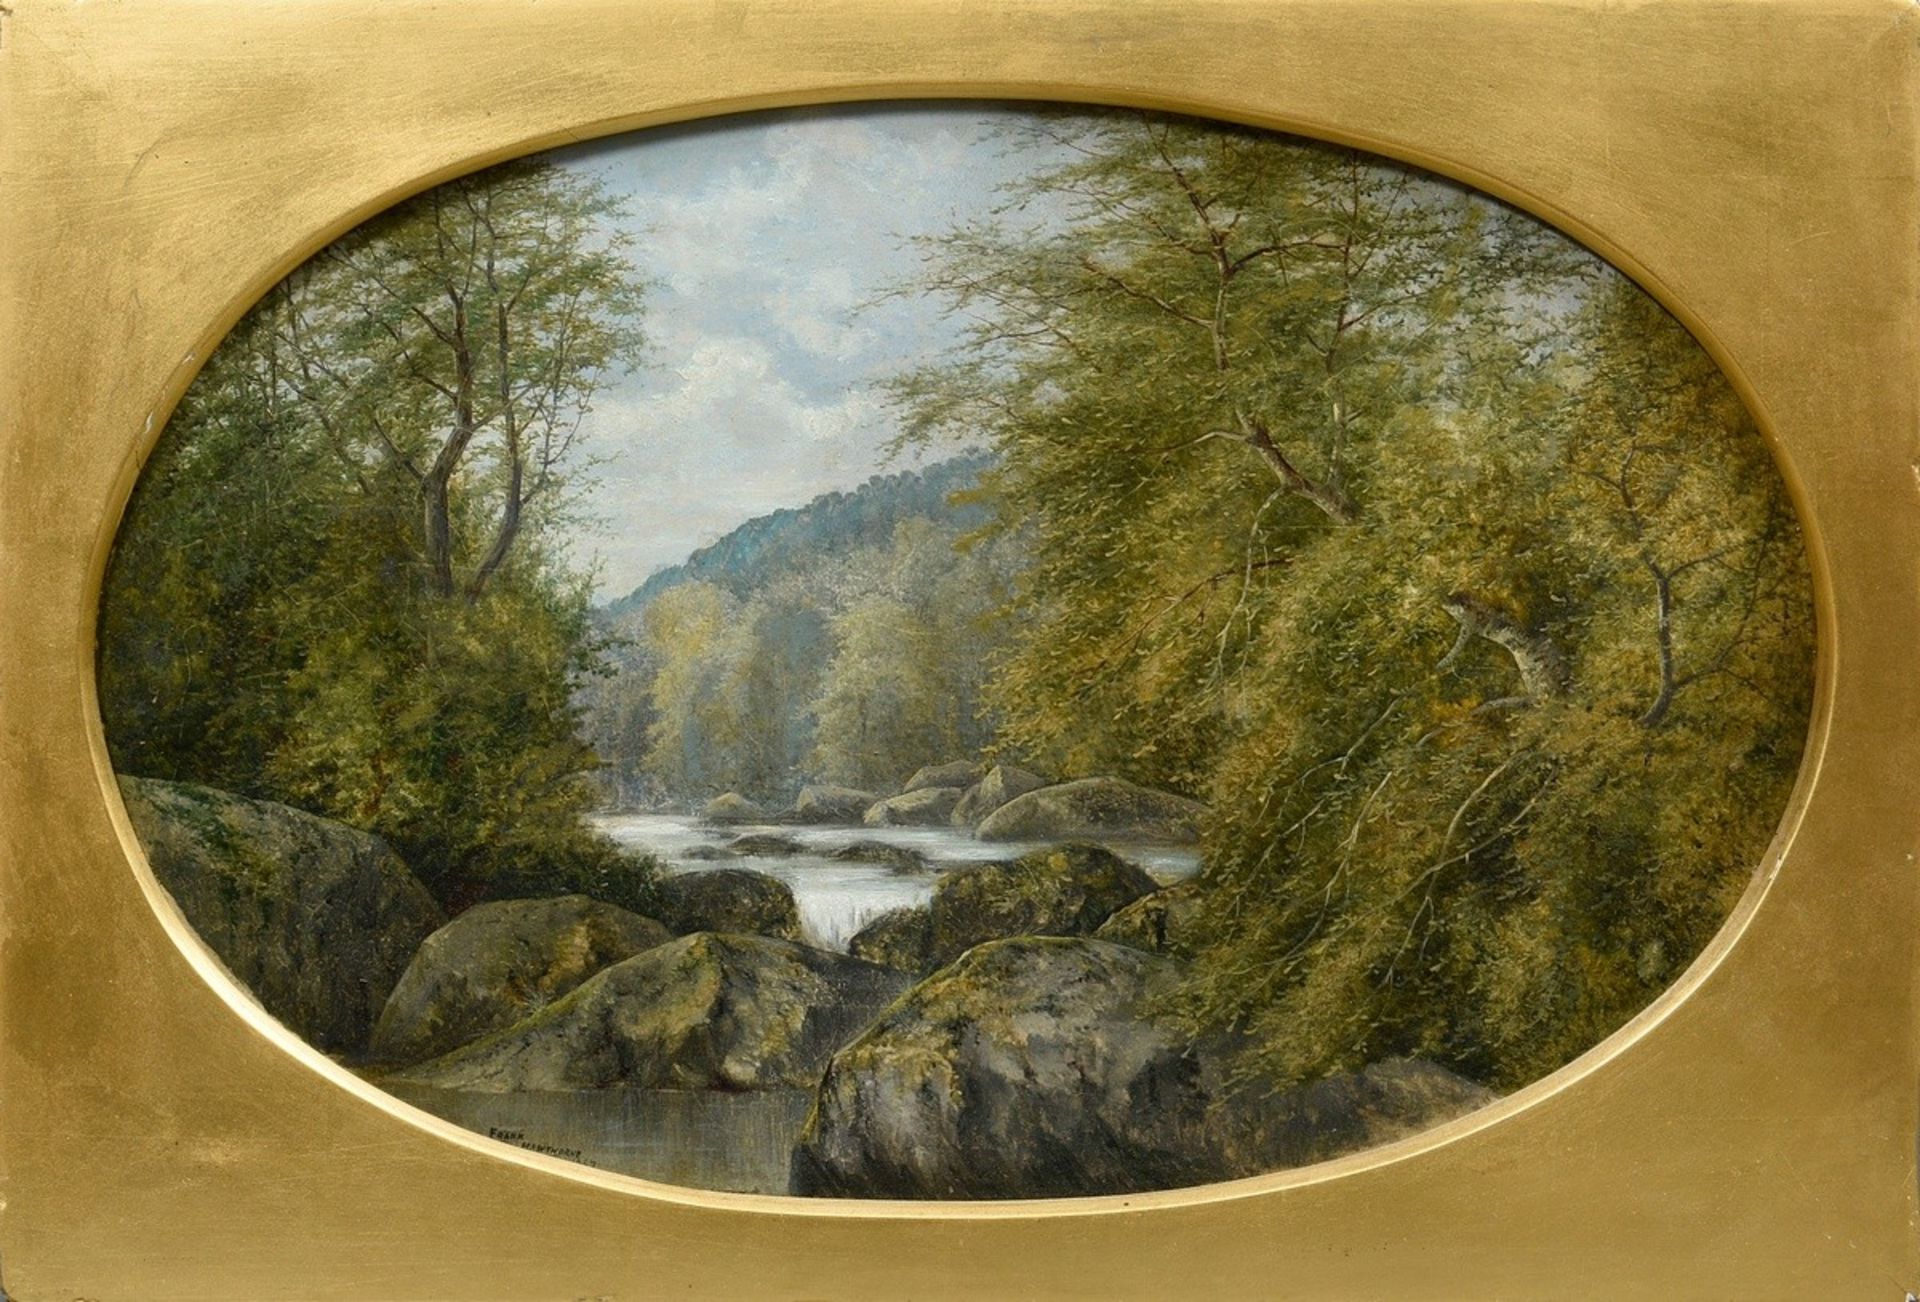 Hawthorne, Frank (19th c.) "Mountains with Watercourse" 1867, oil/cardboard, b.l. sign./dat., 28x44